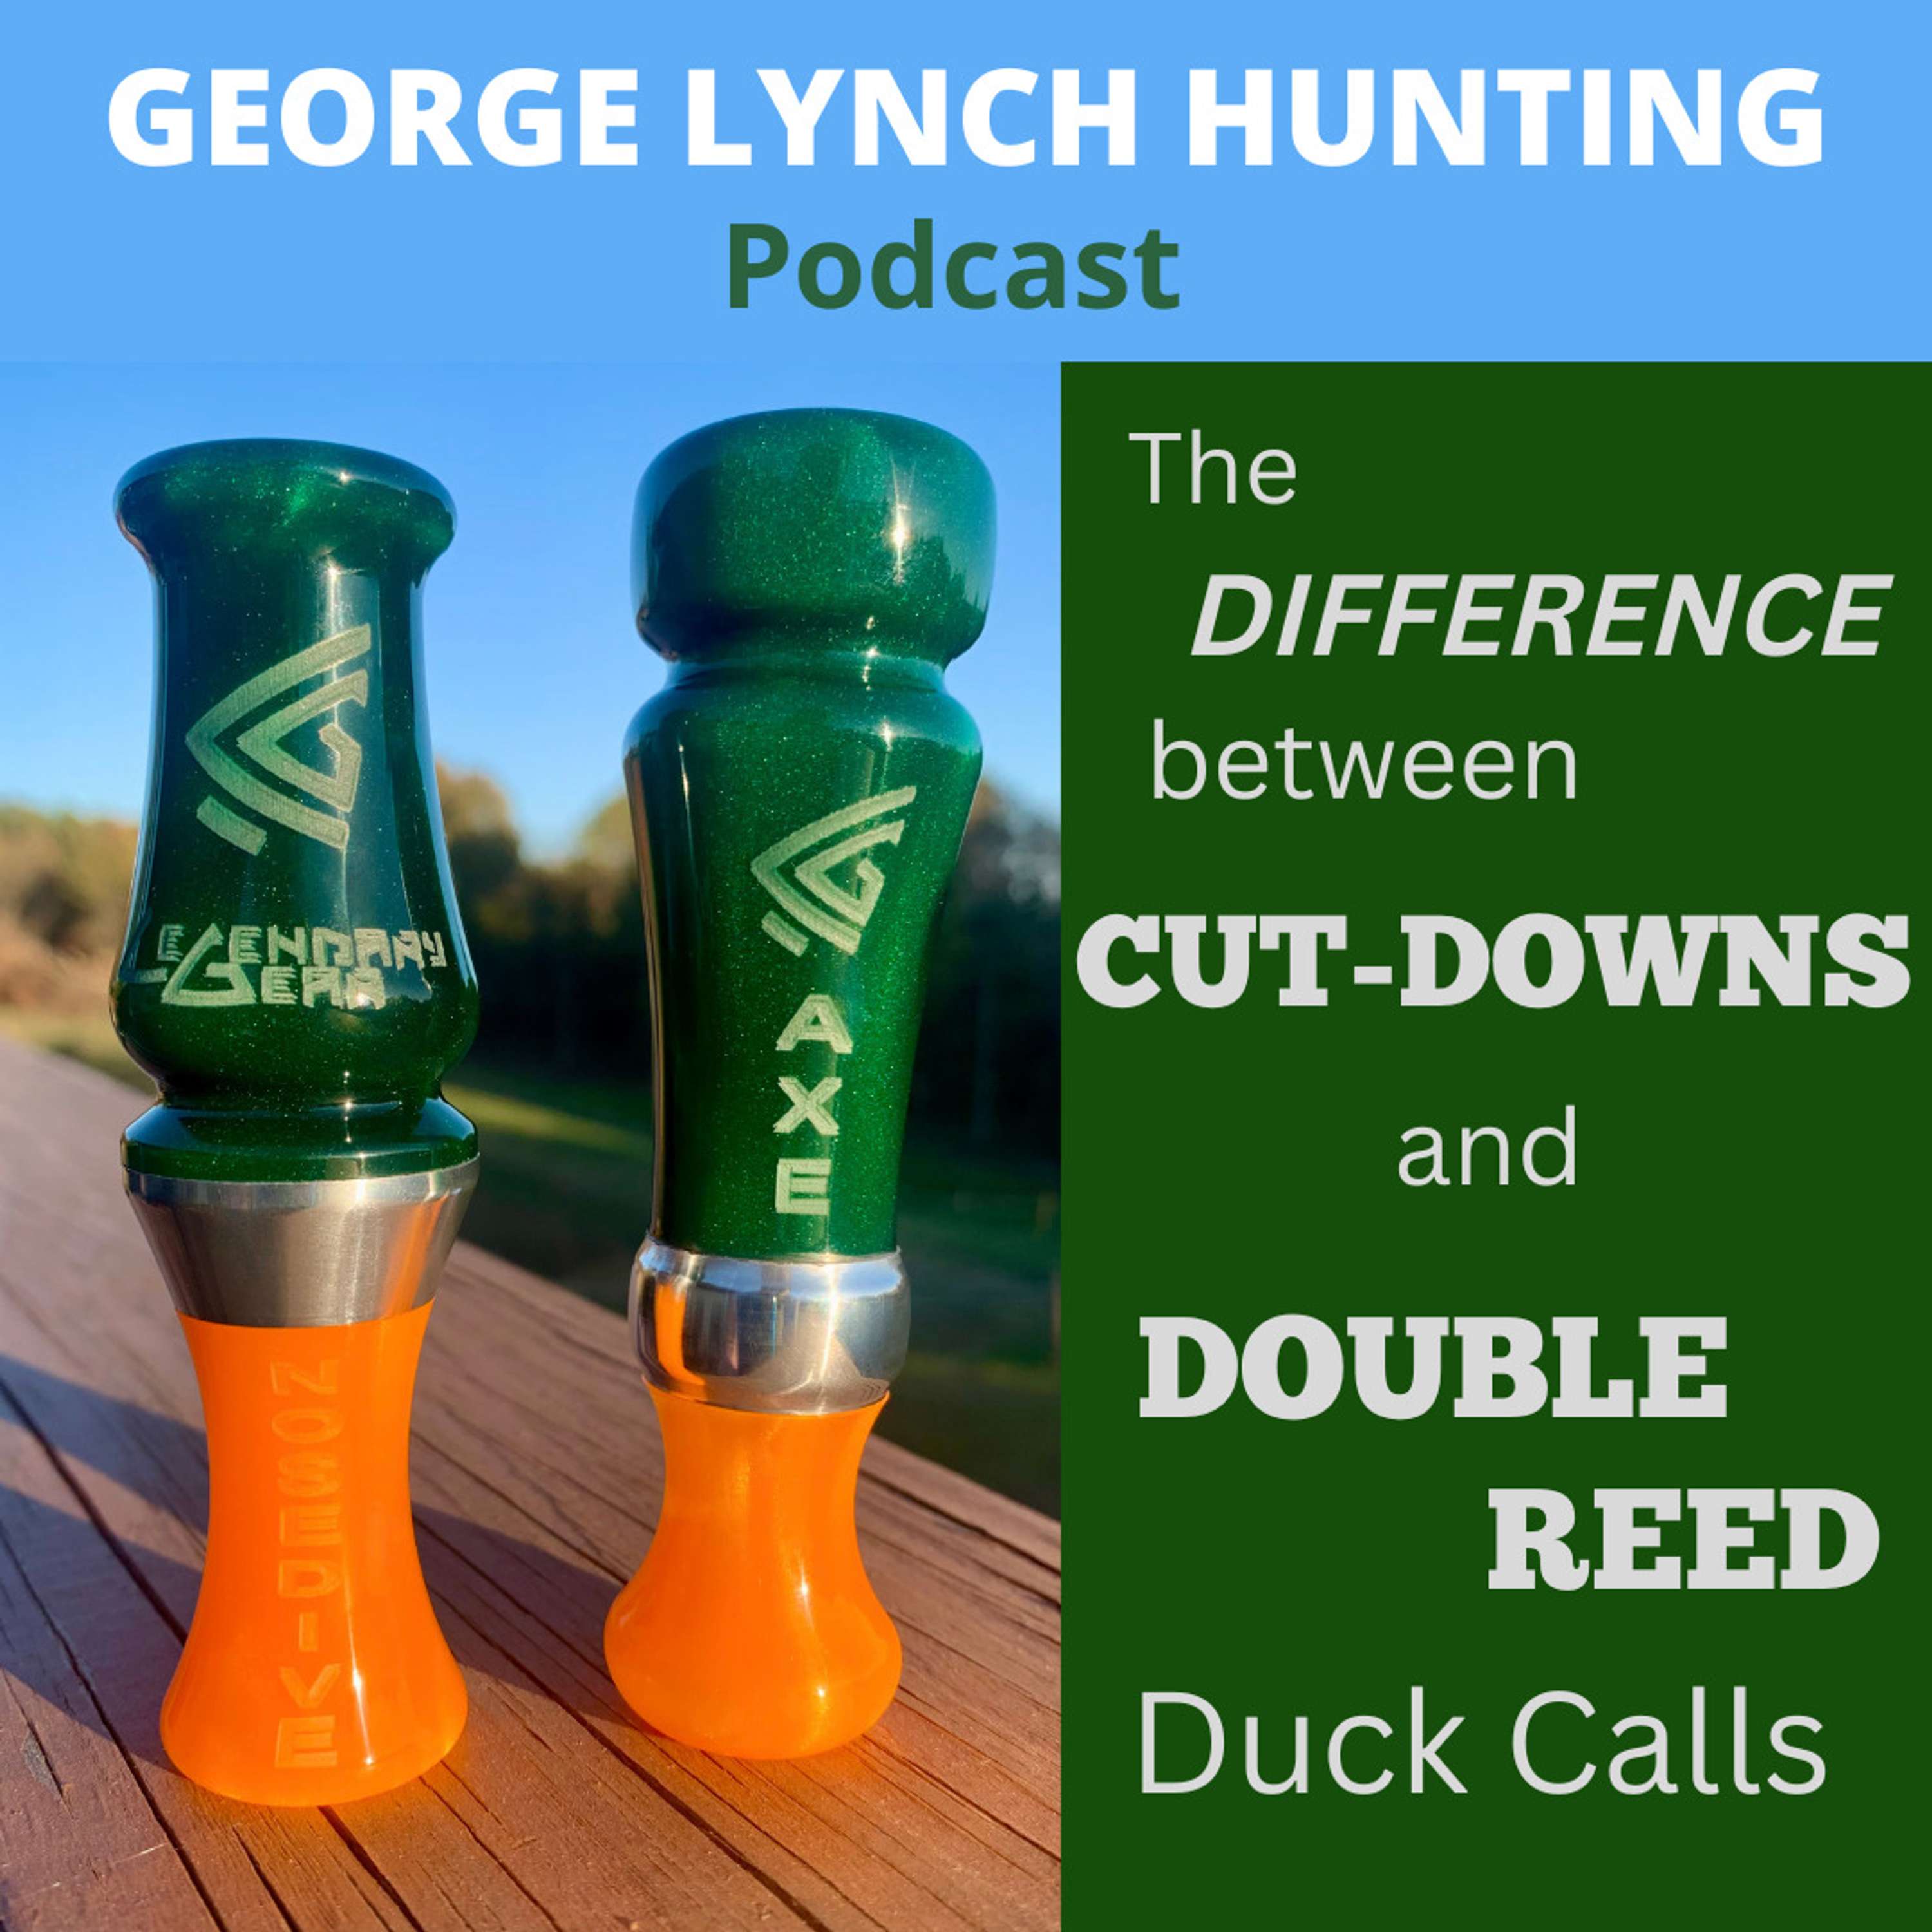 Difference between CUT-DOWNS and DOUBLE REED duck calls by GEORGE LYNCH of Legendary Gear